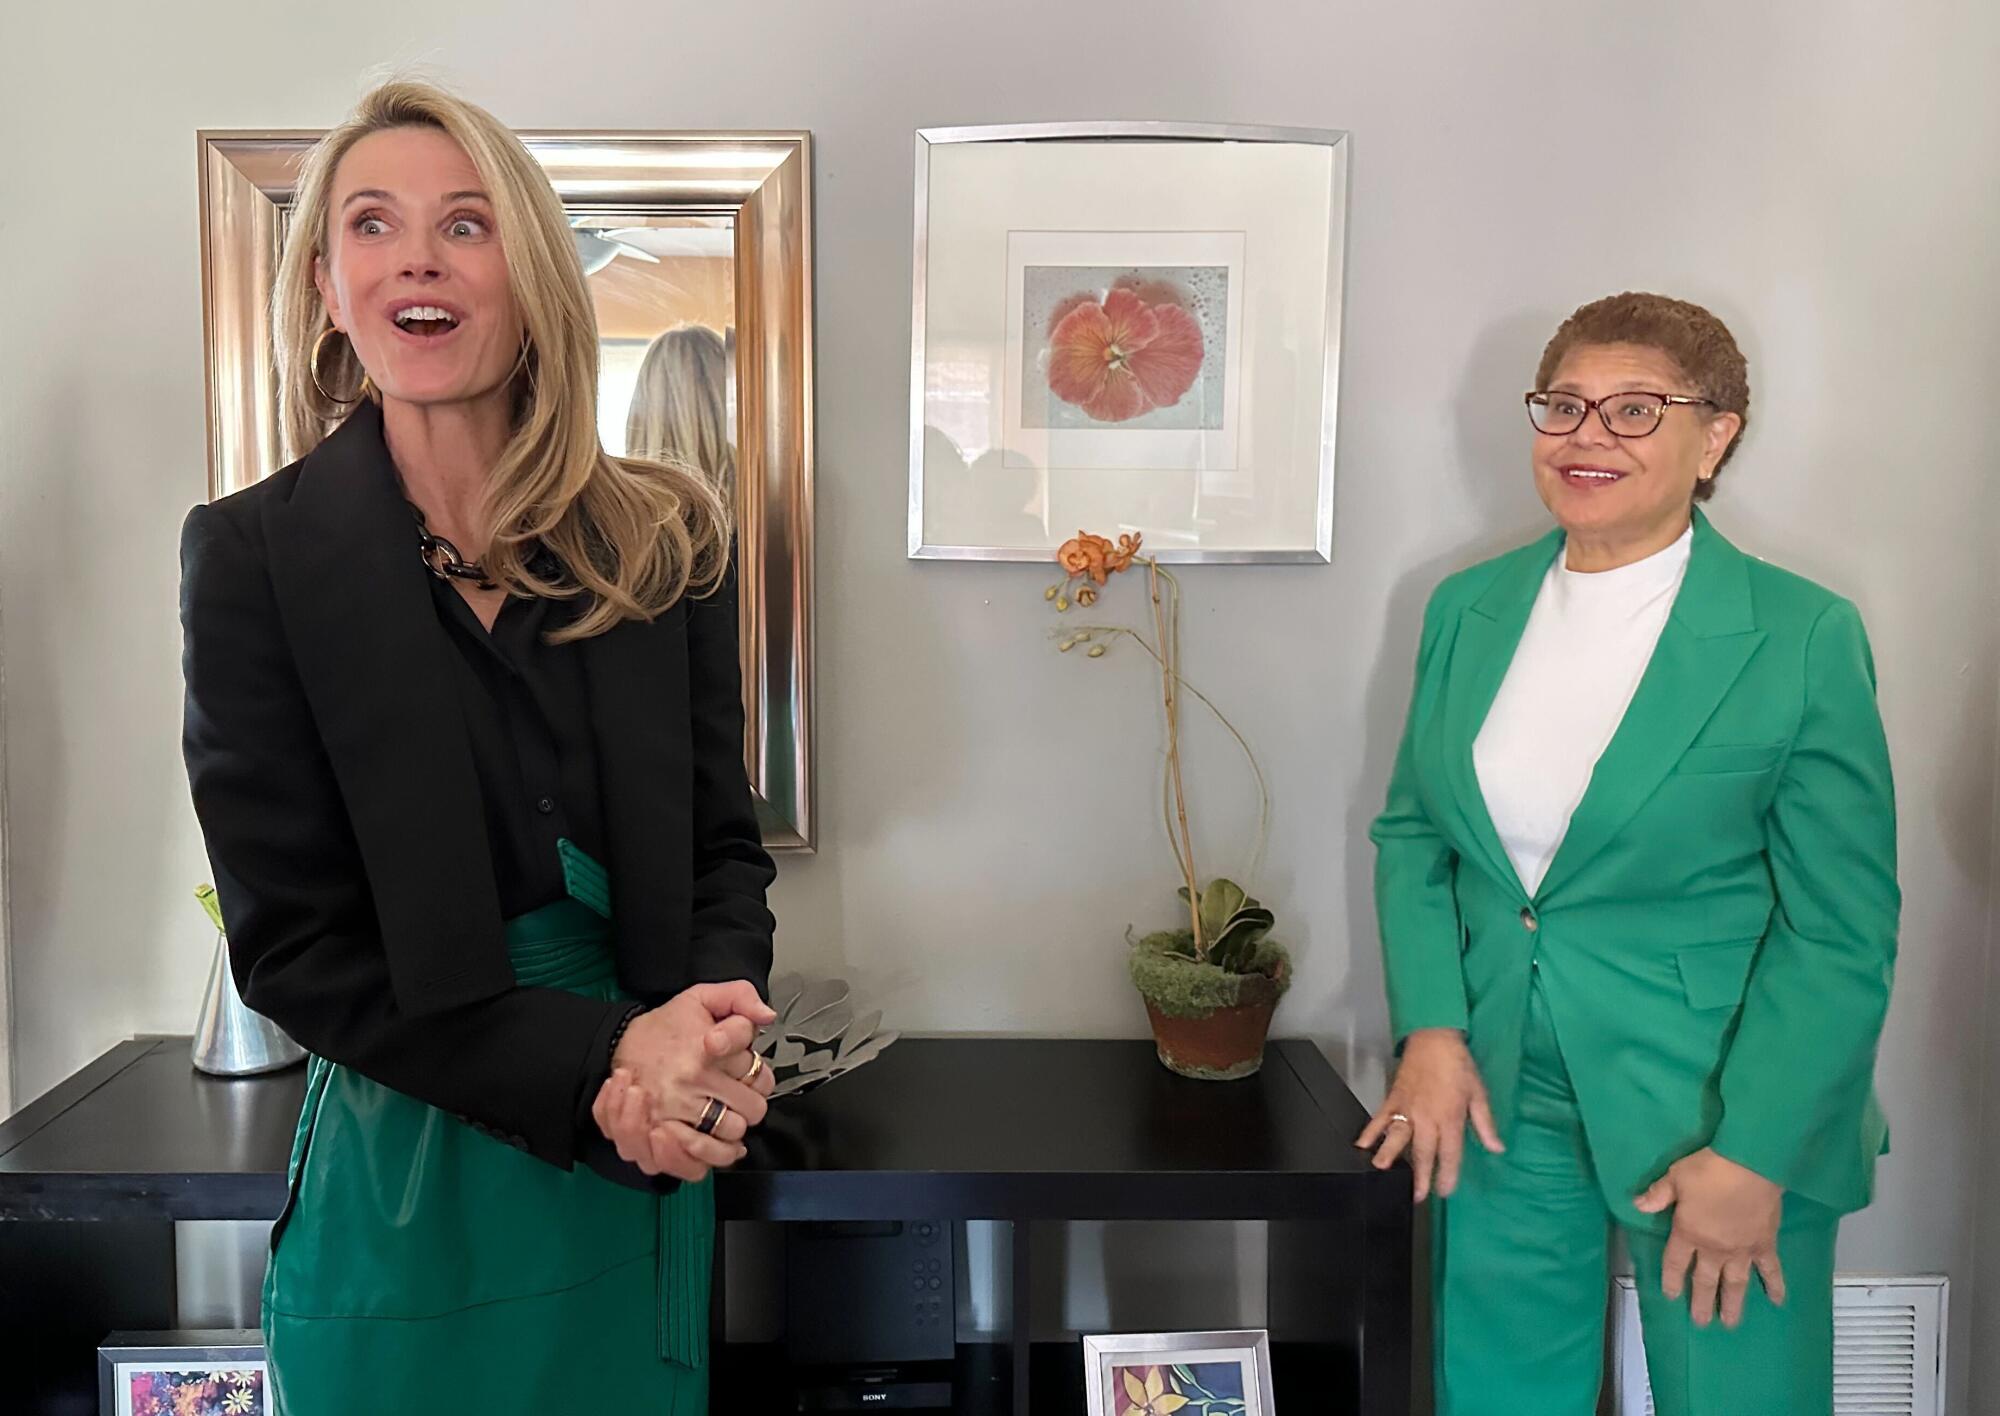 Jennifer Siebel Newsom and Los Angeles Mayor Karen Bass standing in a brightly lit room with art on the wall